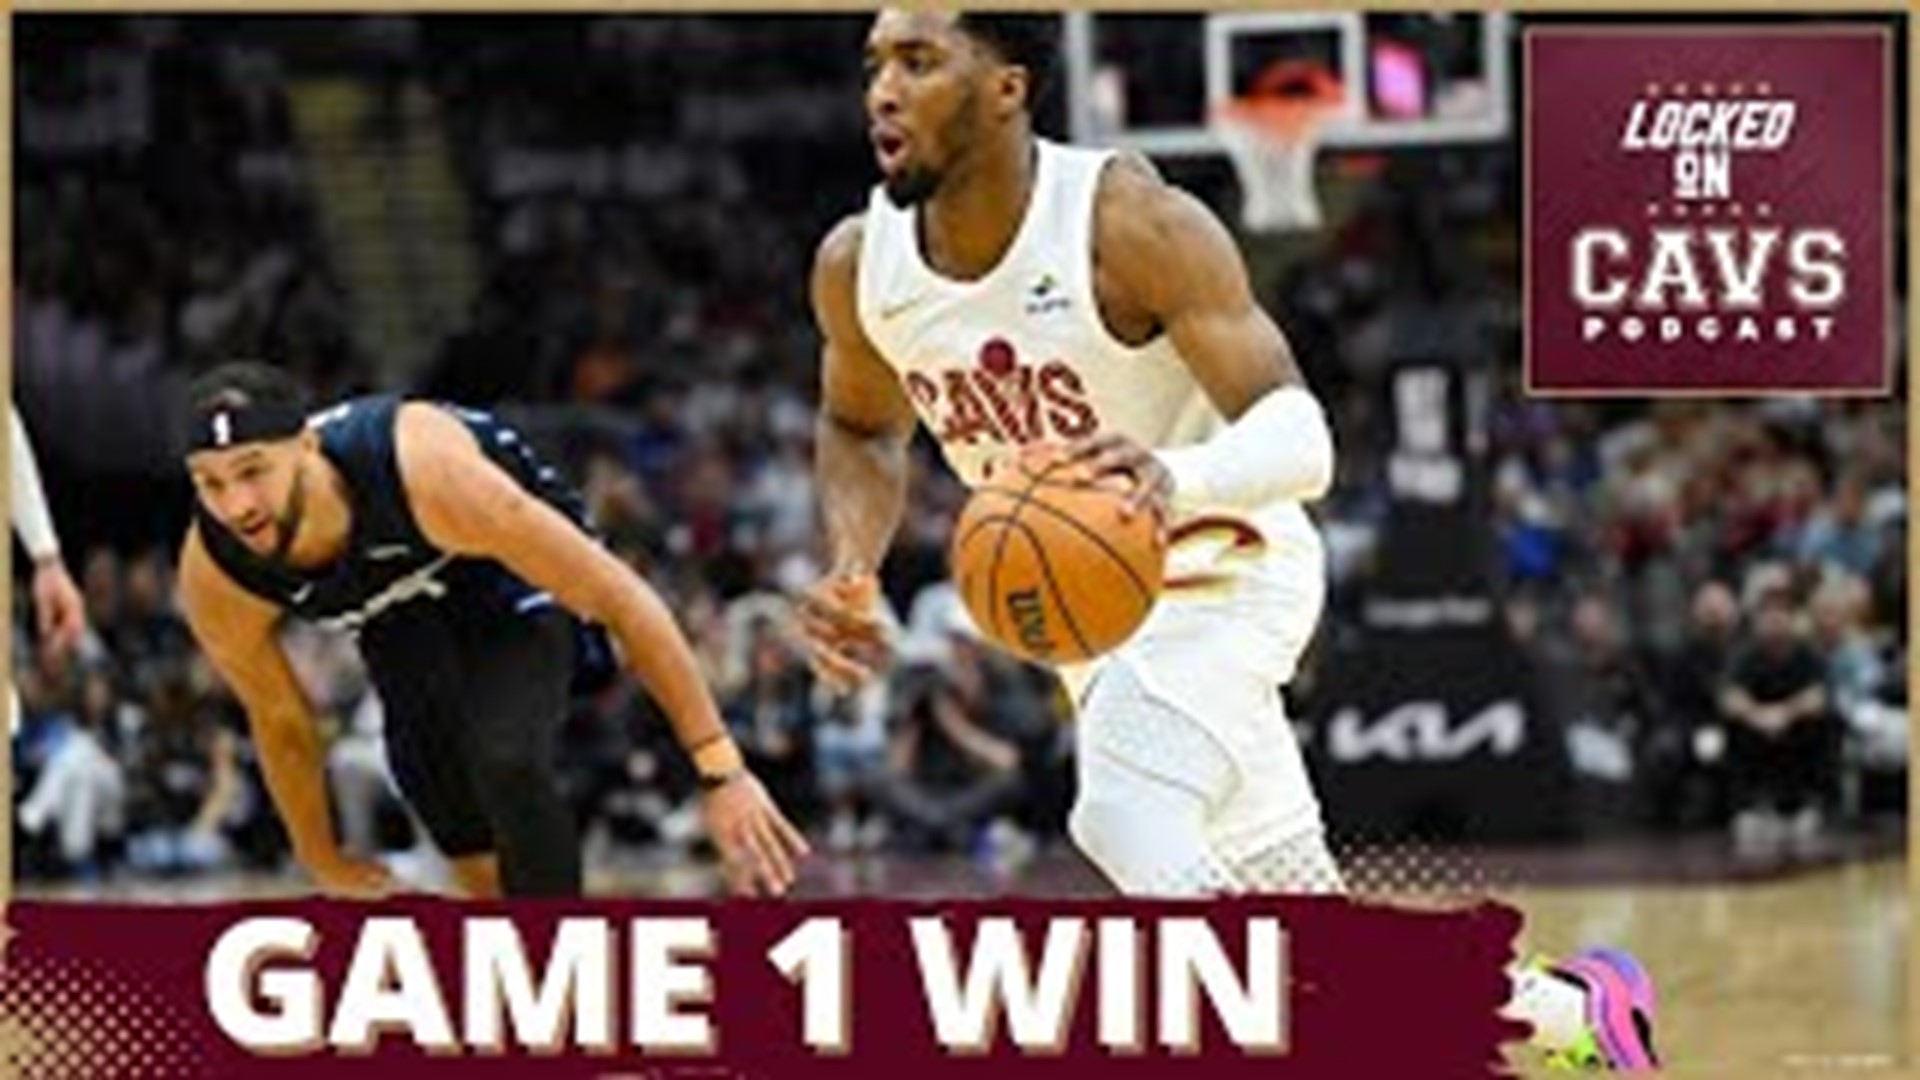 On a new episode of Locked on Cavs, hosts Chris Manning and Evan Dammarrell get into the Cavs' Game 1 win, Mitchell's 30 point night and the defense checking Orlando